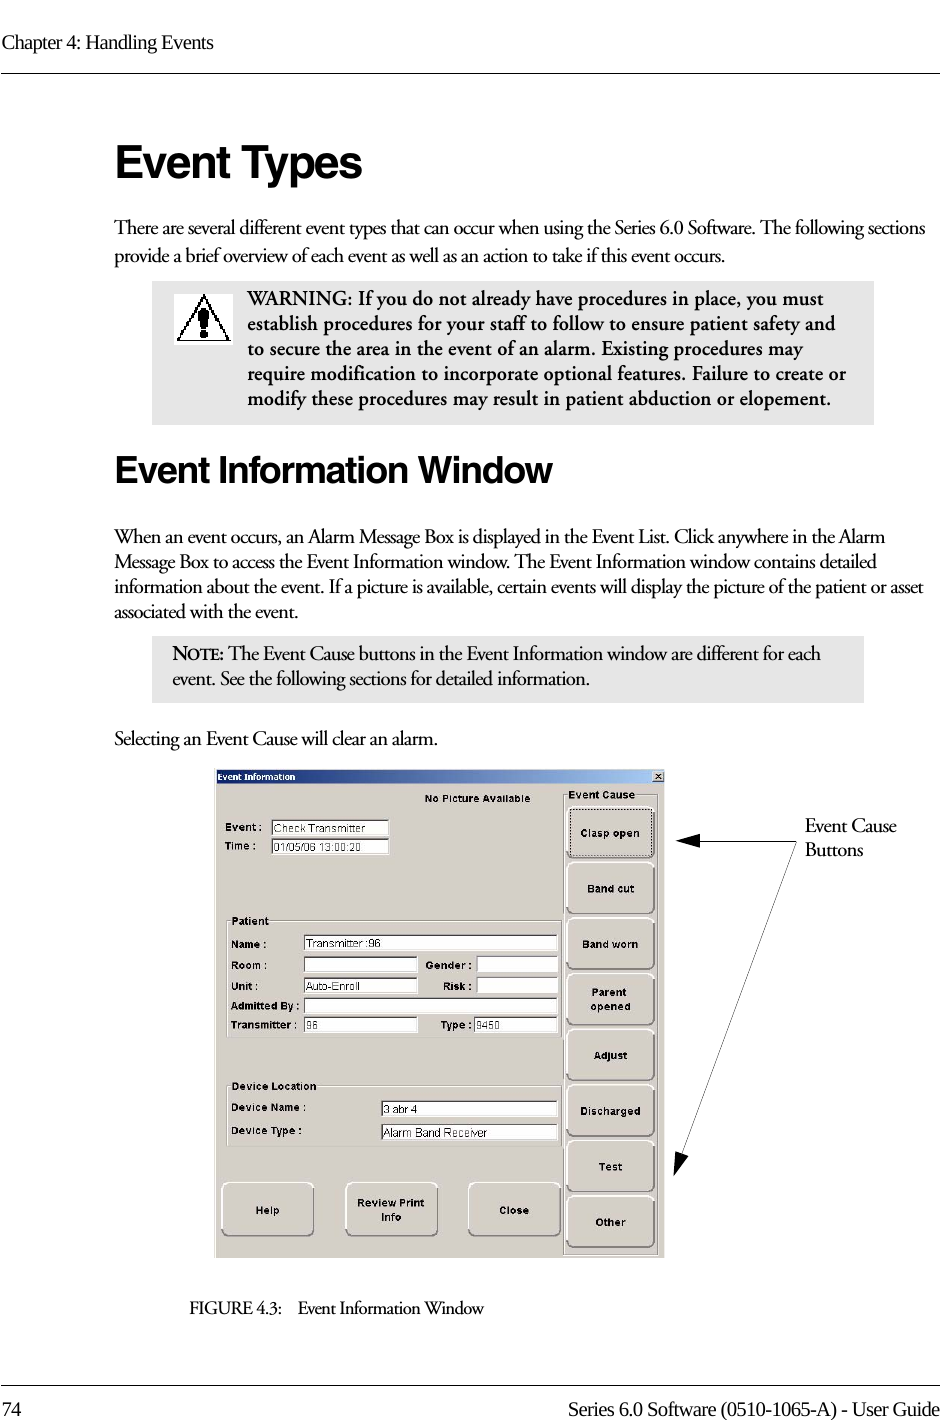 Chapter 4: Handling Events74 Series 6.0 Software (0510-1065-A) - User GuideEvent TypesThere are several different event types that can occur when using the Series 6.0 Software. The following sections provide a brief overview of each event as well as an action to take if this event occurs.Event Information WindowWhen an event occurs, an Alarm Message Box is displayed in the Event List. Click anywhere in the Alarm Message Box to access the Event Information window. The Event Information window contains detailed information about the event. If a picture is available, certain events will display the picture of the patient or asset associated with the event. Selecting an Event Cause will clear an alarm.FIGURE 4.3:    Event Information WindowWARNING: If you do not already have procedures in place, you must establish procedures for your staff to follow to ensure patient safety and to secure the area in the event of an alarm. Existing procedures may require modification to incorporate optional features. Failure to create or modify these procedures may result in patient abduction or elopement. NOTE: The Event Cause buttons in the Event Information window are different for each event. See the following sections for detailed information. Event Cause Buttons